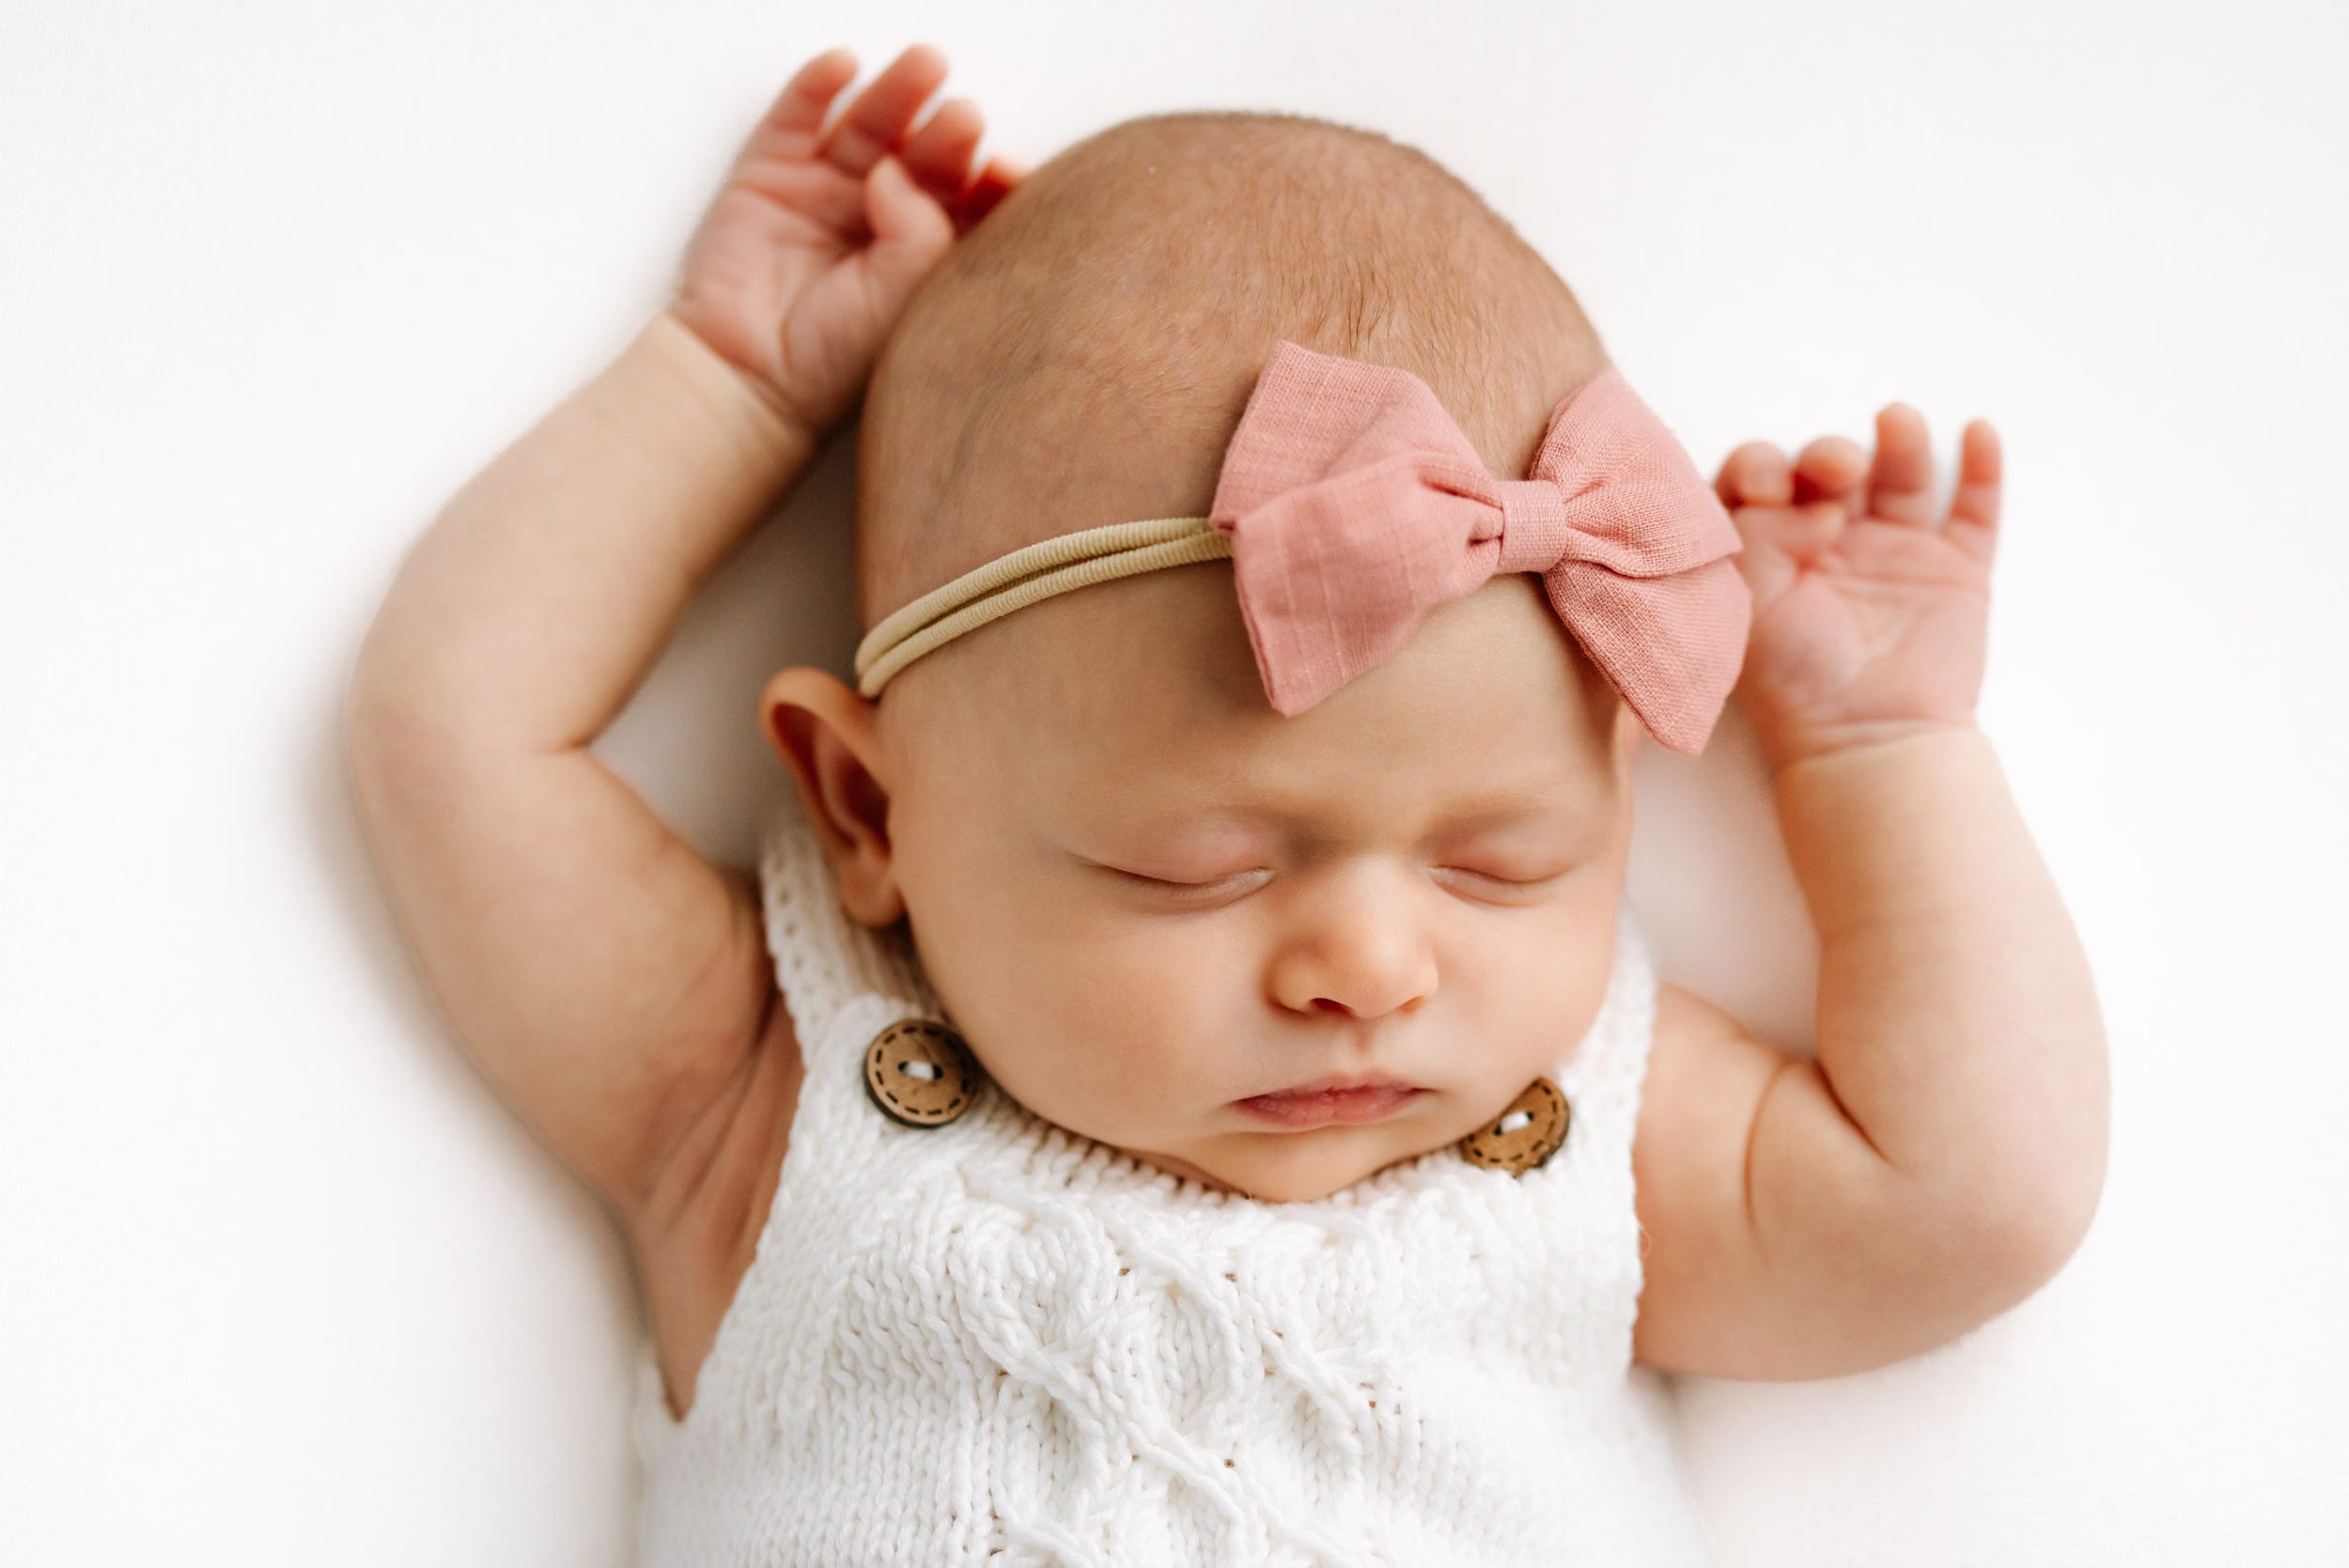 a baby girl wearing a white knit romper and pink headband laying on a white backdrop and sleeping peacefully with her arms resting up next to her head during a newborn photo session